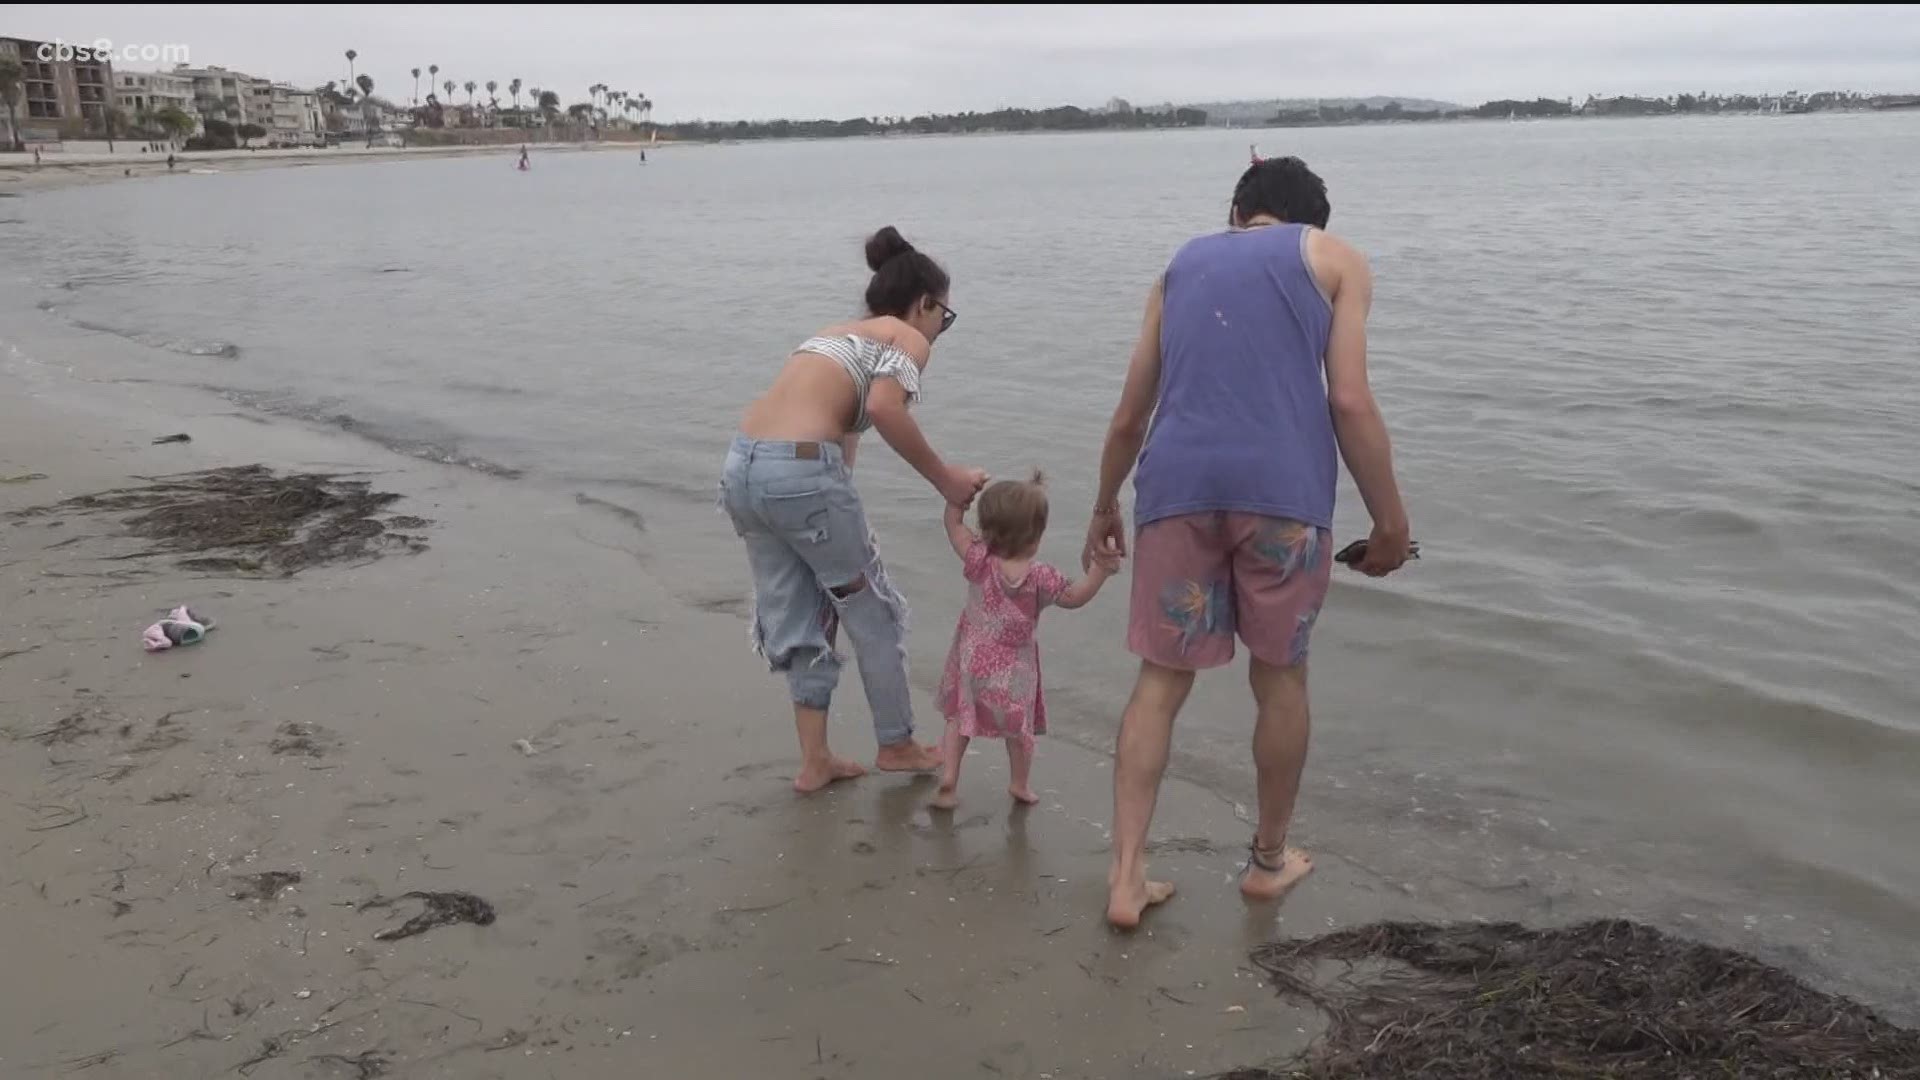 Families in San Diego found all types of ways to celebrate Father's Day on Sunday.